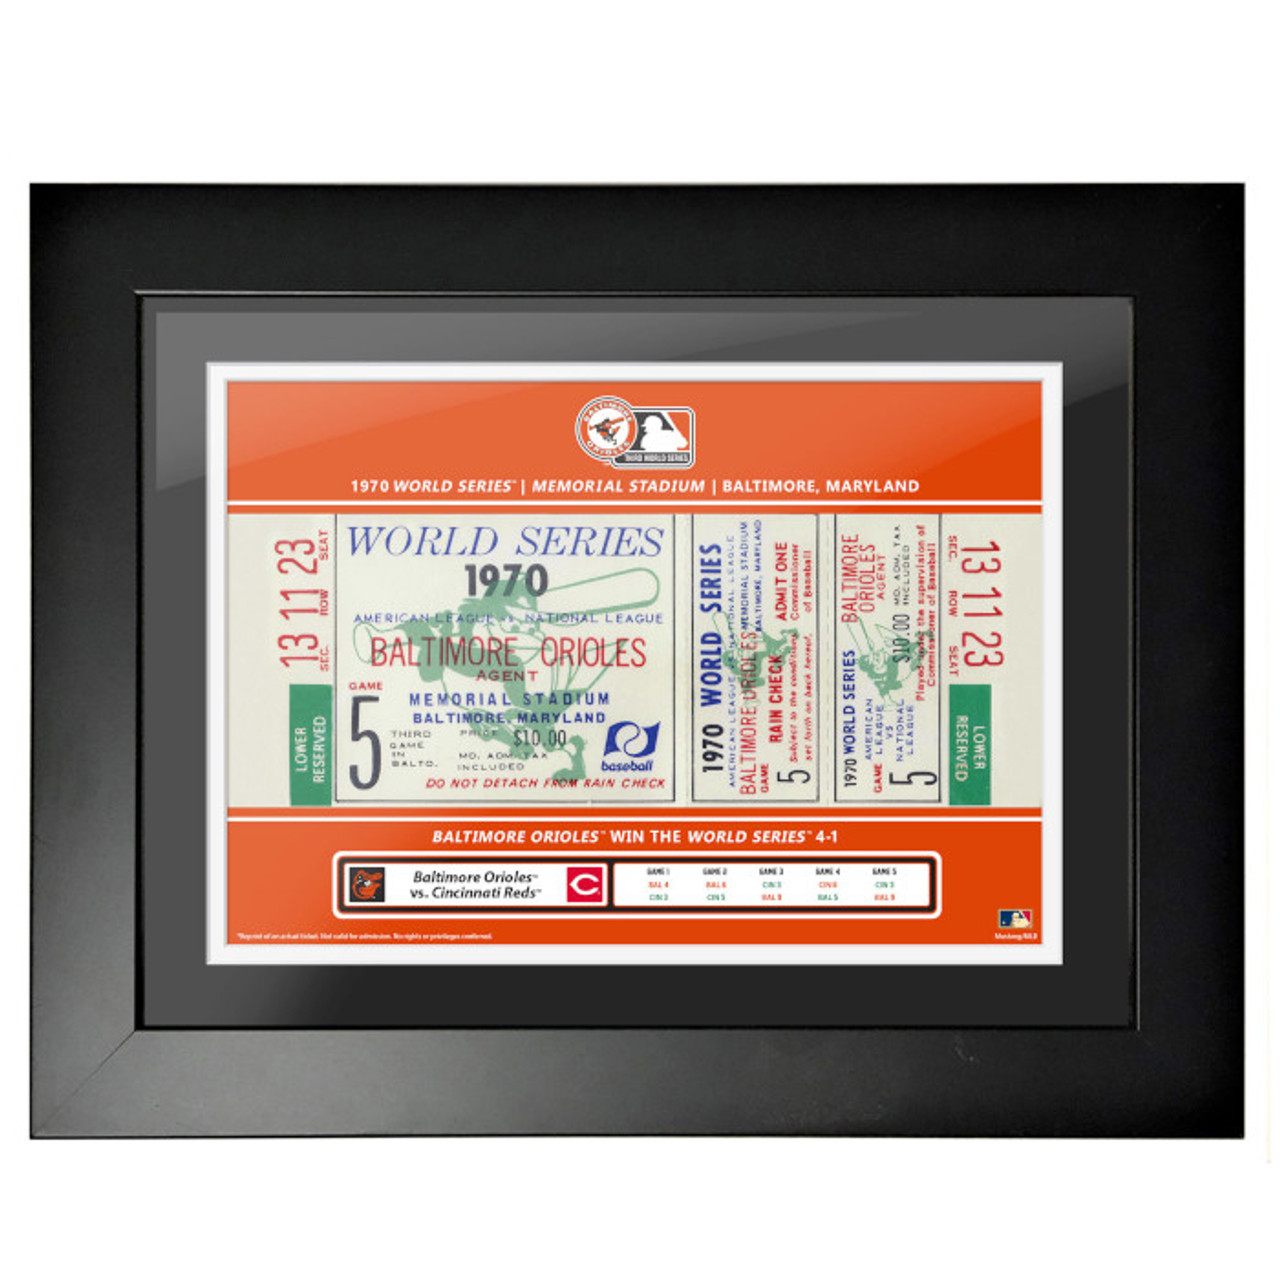 Baltimore Orioles 1970 World Series Game 5 Framed 18 x 14 Ticket